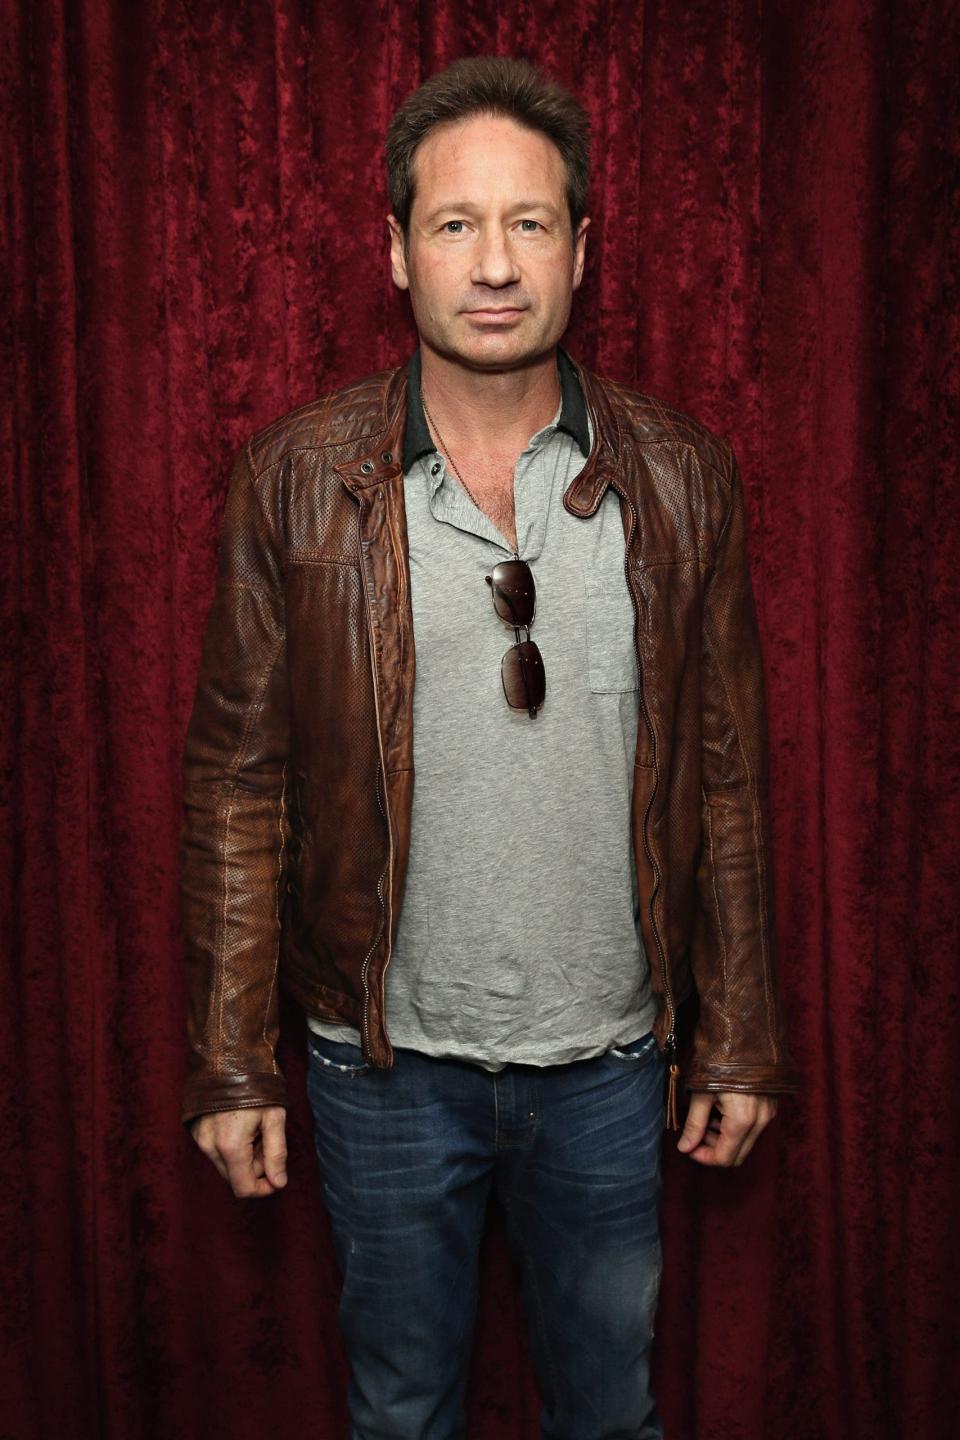 David Duchovny, wearing a brown leather jacker and gray polo, smiles in front of a red curtain